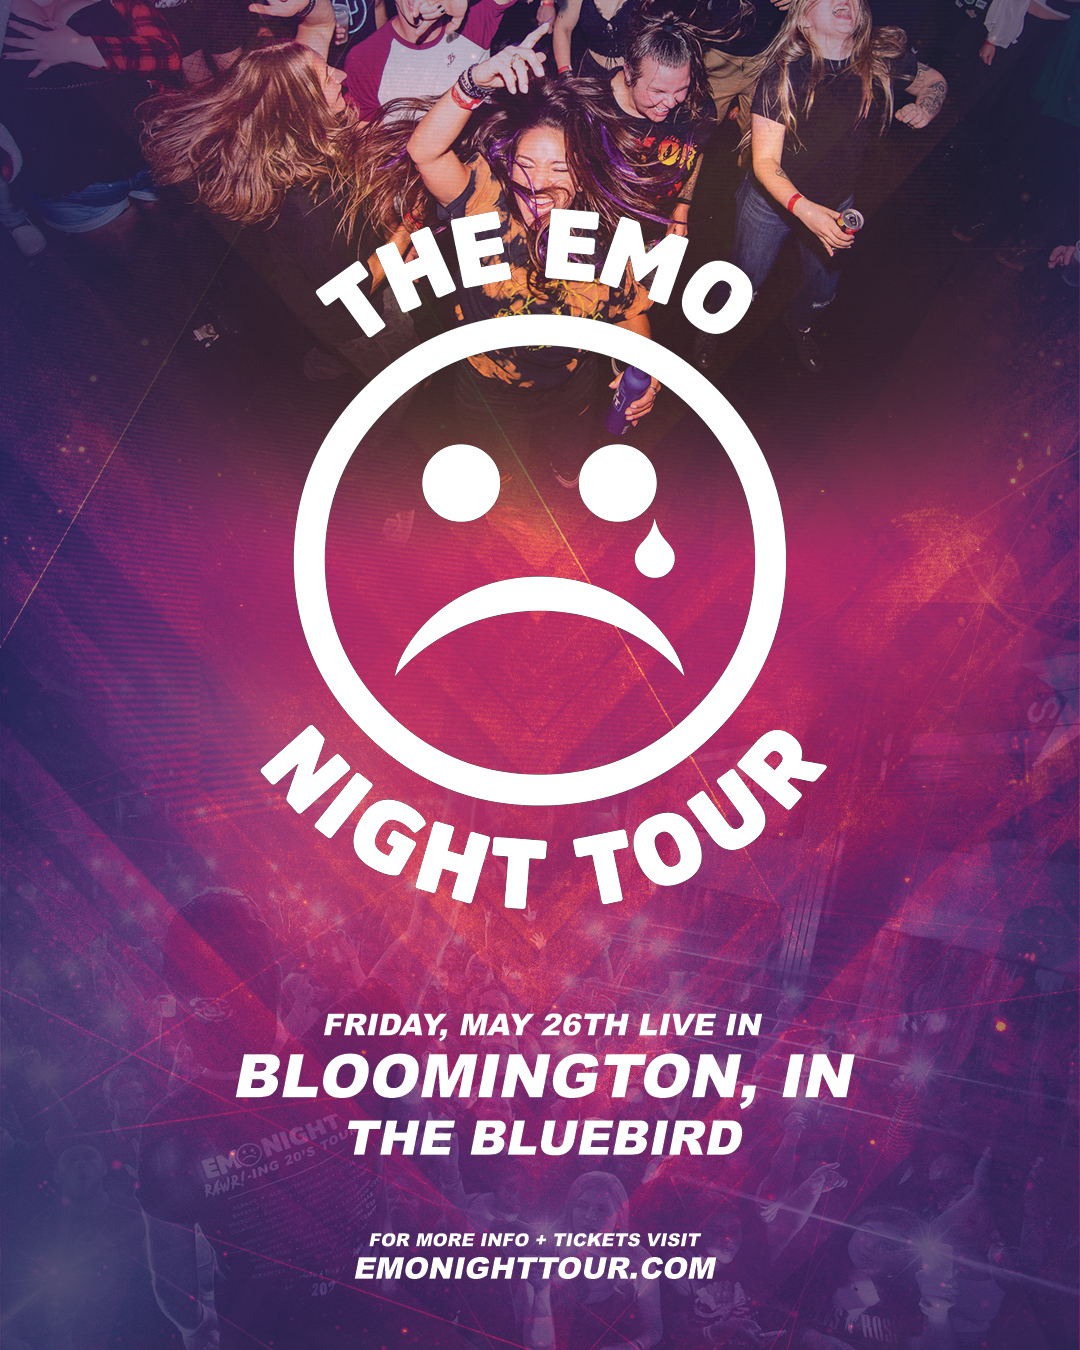 Buy Tickets to The Emo Night Tour in Bloomington on May 26, 2023